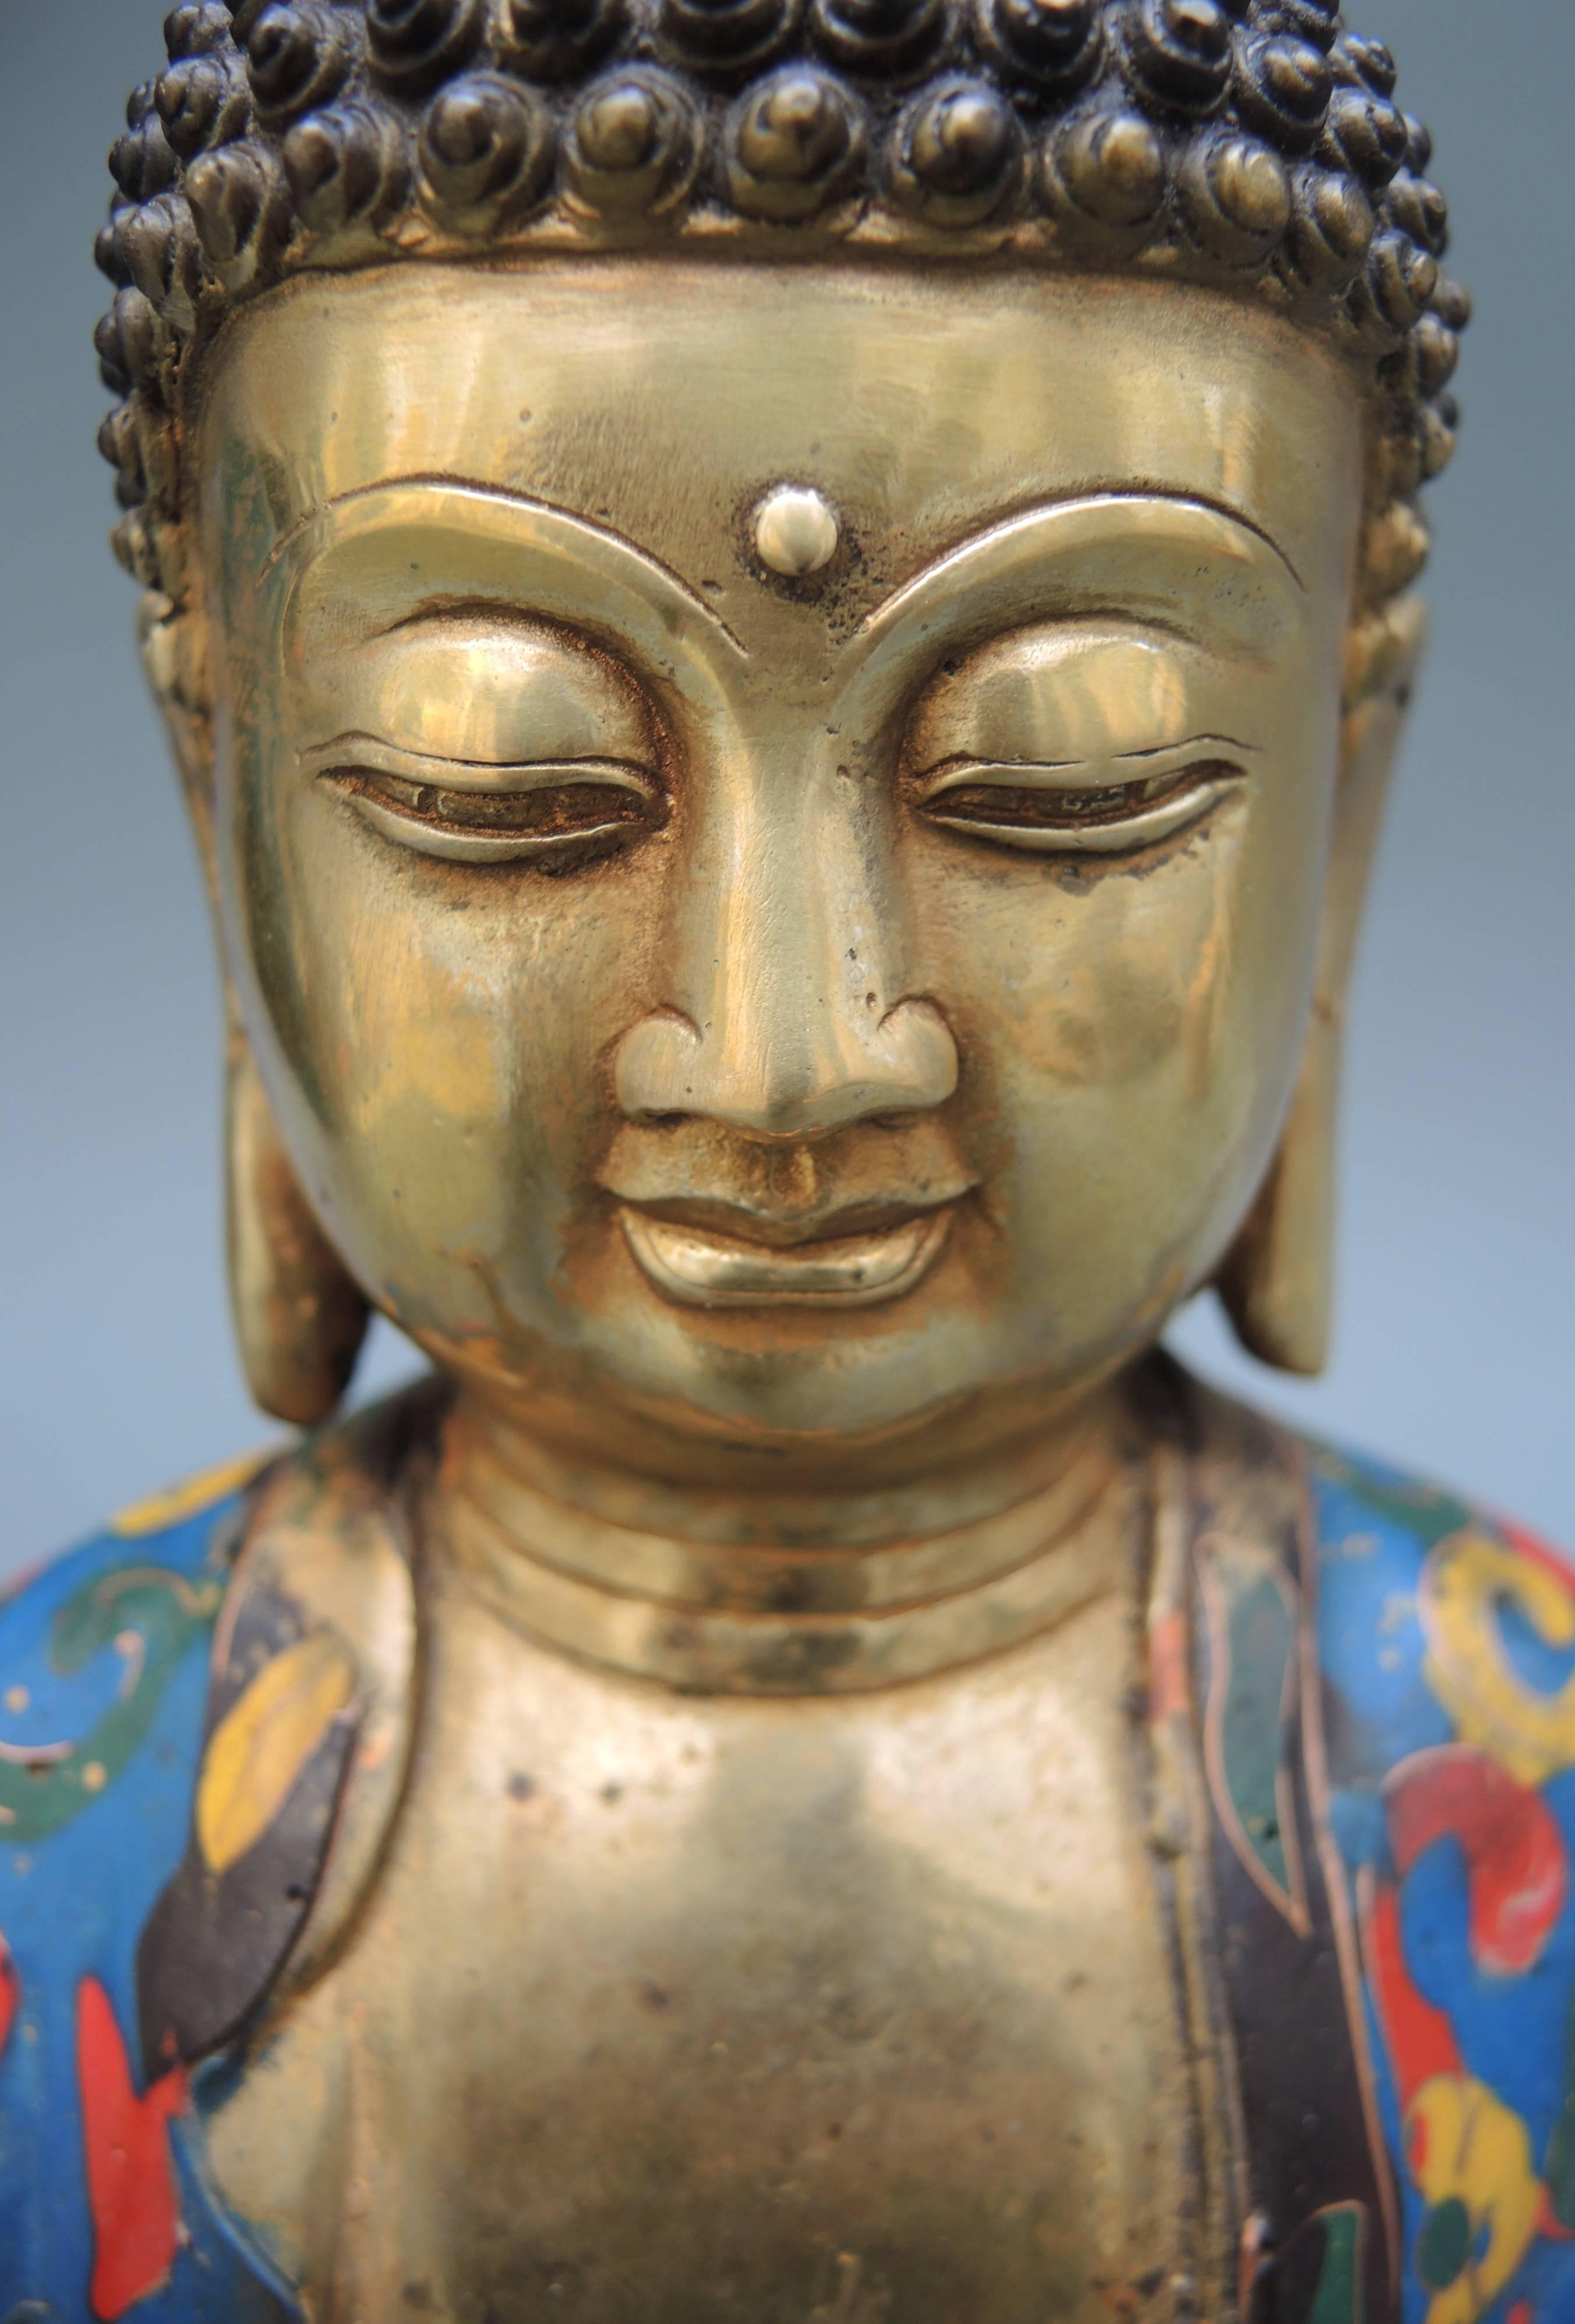 A beautiful and serene gilt bronze Buddha statue of Shakyamuni Tathagata Buddha. An unusual combination of classical bronze with a more modern feeling application of abstract cloisonné enamel work.
Buddhism, the religion and philosophy developed